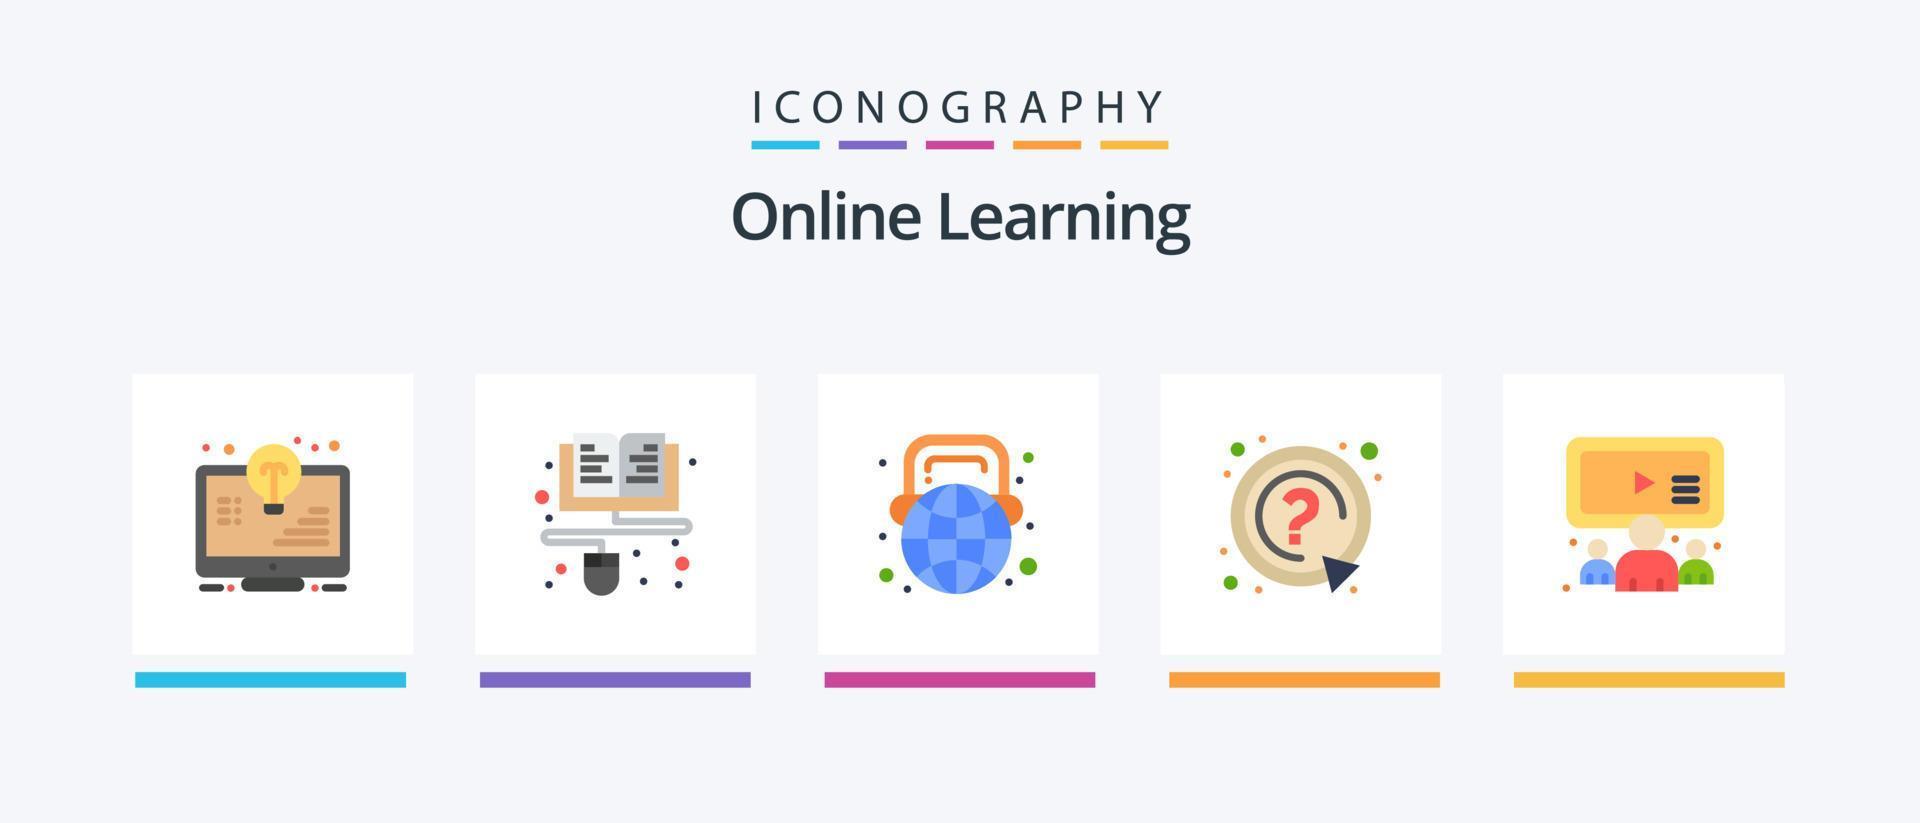 Online Learning Flat 5 Icon Pack Including support. mark. online. ask. world. Creative Icons Design vector